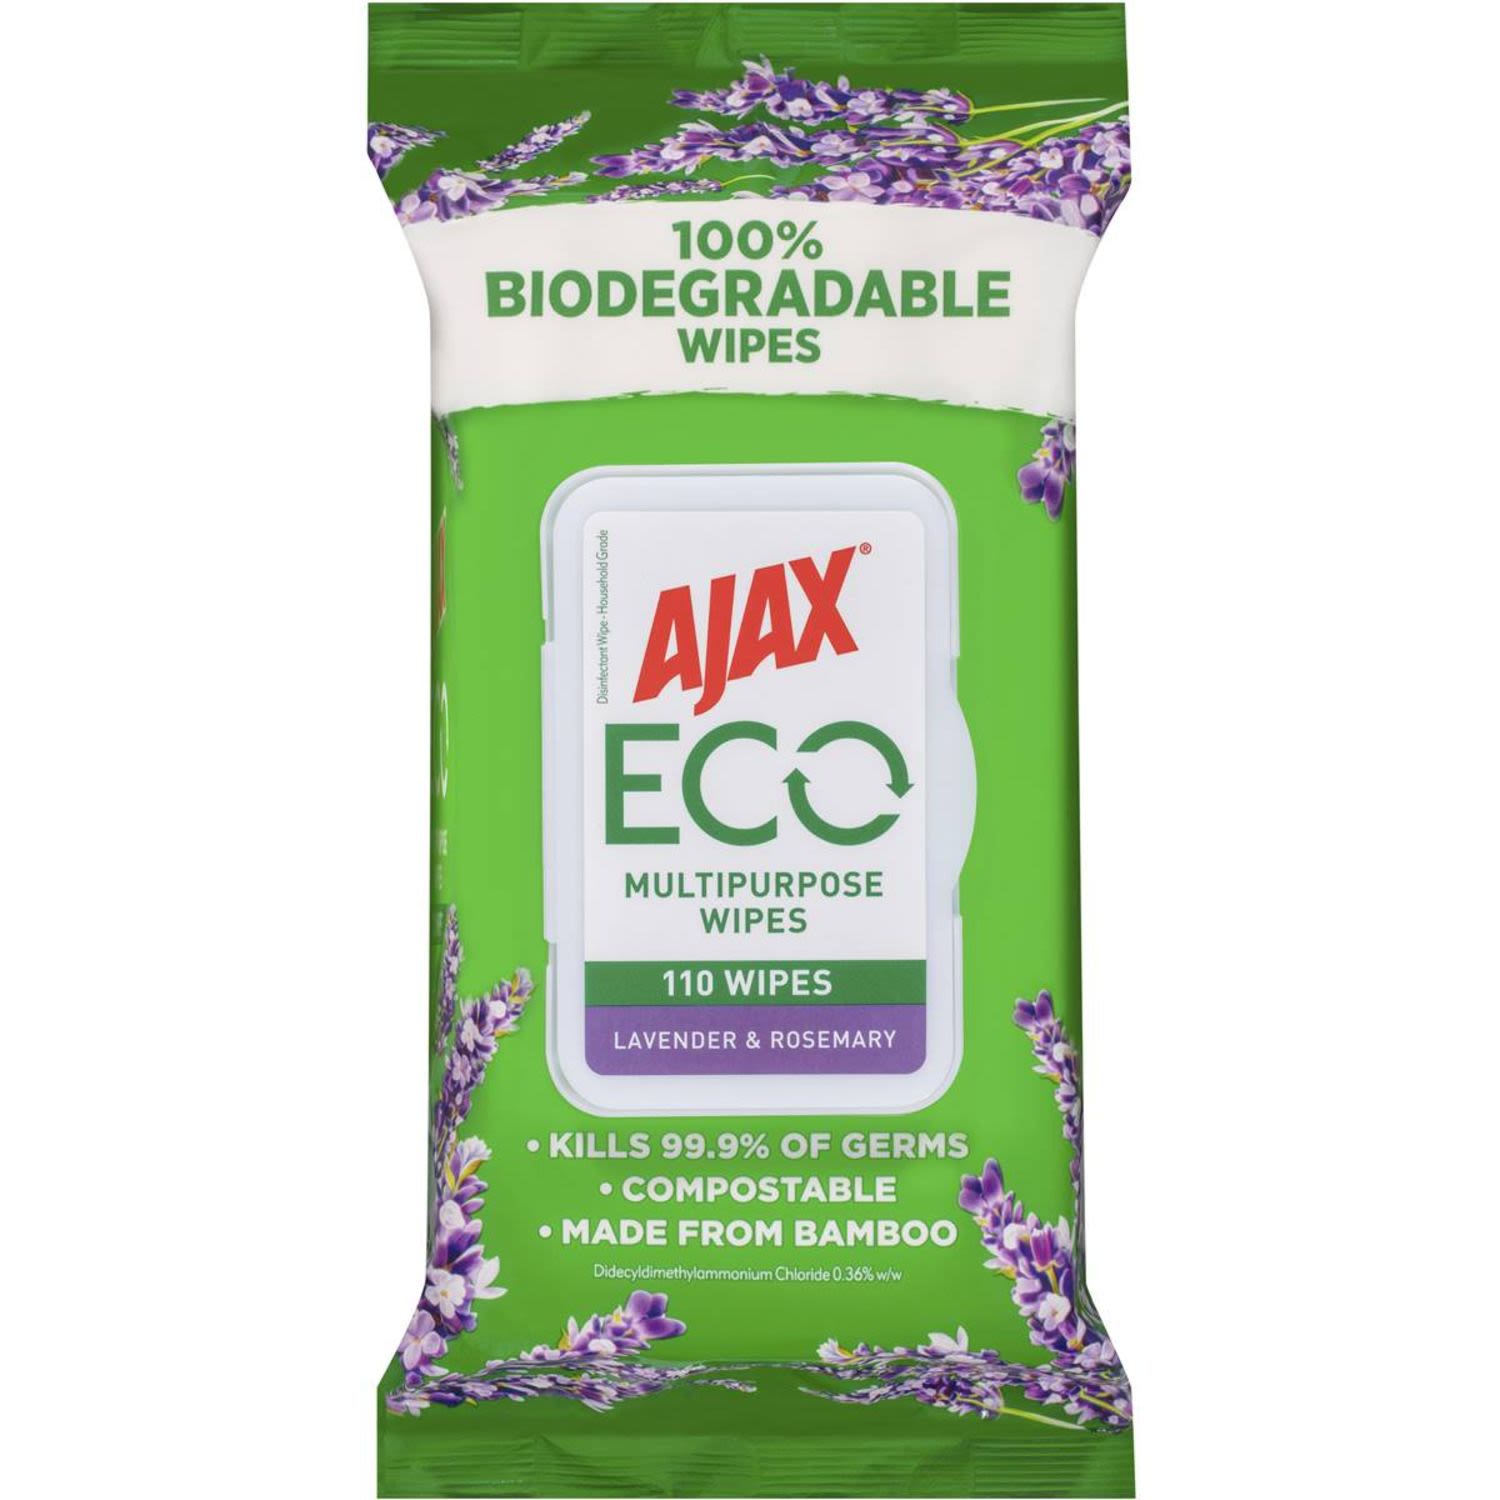 It's simple, we're better for the planet because we know that's important to you.<br /><br />- Feel proud using 100% biodegradable wipes.<br />- Feel powerful with antibacterial disinfectant wipes that kill 99.9% of germs.<br />- Feel good knowing these wipes are compostable & made from bamboo fibres.<br /><br />Multipurpose Wipes, Use us to clean:<br />The Kitchen: Benchtops, stovetops, sinks, rubbish bins.<br />The Bathroom: Toilets, toilet seats, floor, baths, taps, basins.<br />Other surfaces: Tables, desks, phones, door handles, high chairs.<br /><br />FOUR EASY STEPS<br />1. Pop open the lid, peel back the sticker and pull our wipe through.<br />2. Simply wipe your surfaces until they're clean.<br />3. If you want to disinfect (non-porous) surfaces, wipe them until they are thoroughly wet, then let it sit for 10 minutes. They're so easy to use, there's no need to dilute them or rinse.<br />4. Once you're done, please dispose of our wipe thoughtfully! Do not flush them down the toilet - our planet will thank you!<br /><br />Always read the label. Follow the directions for use.<br /><br />Pack Size: 110 Wipes, Lavender & Rosemary Scent<br /> <br /> <br /><br />Country of Origin: Made in China from local and imported ingredients.